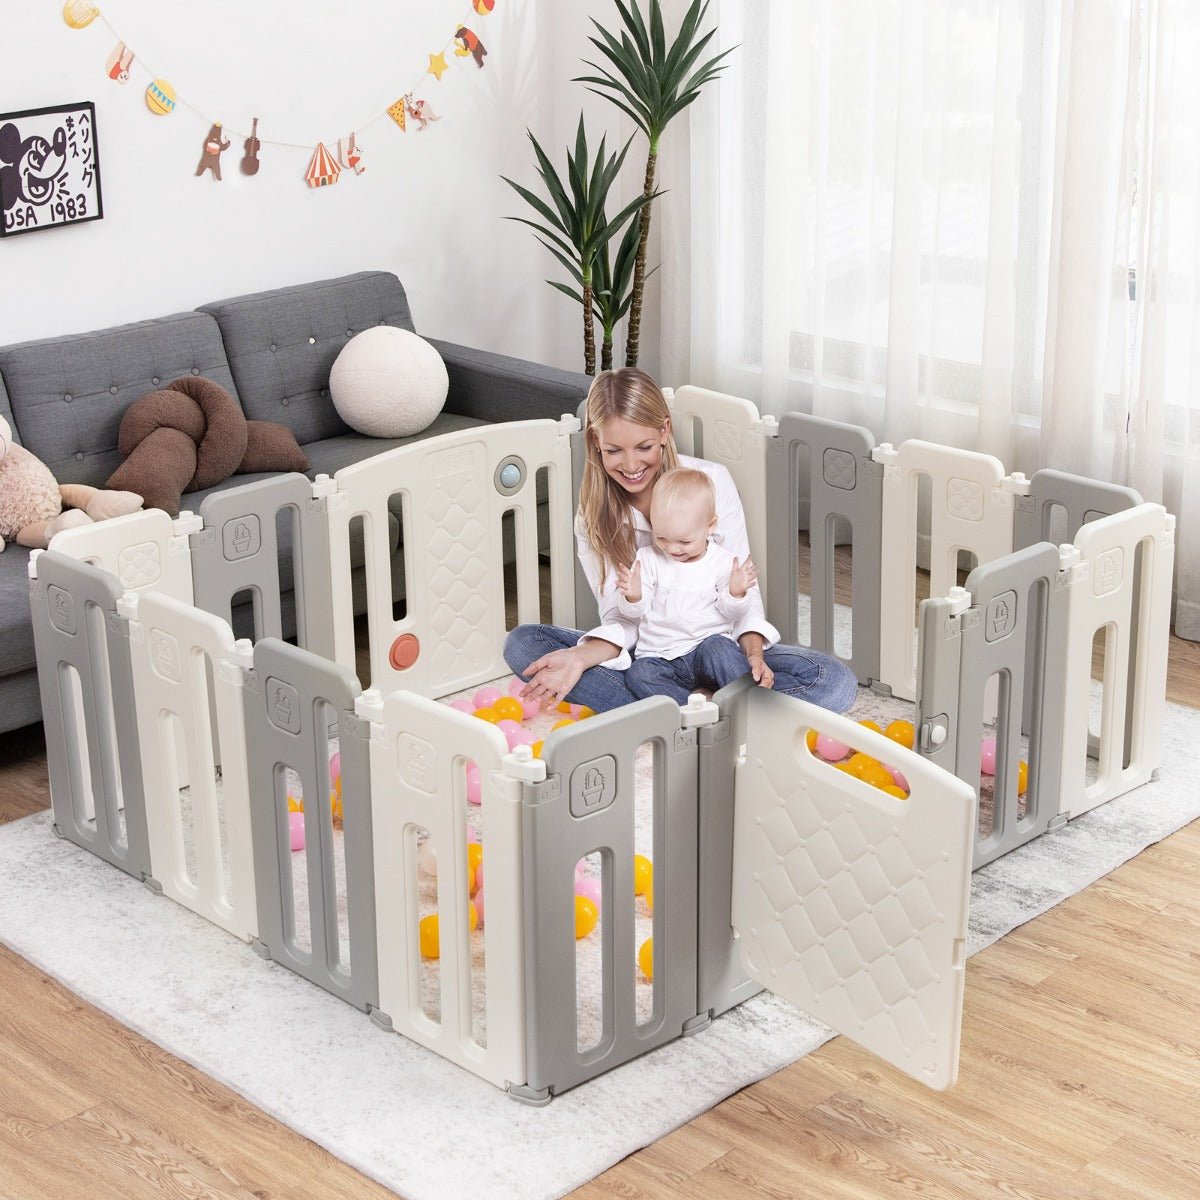 Toddler Play Yard with Safety Lock and Portability